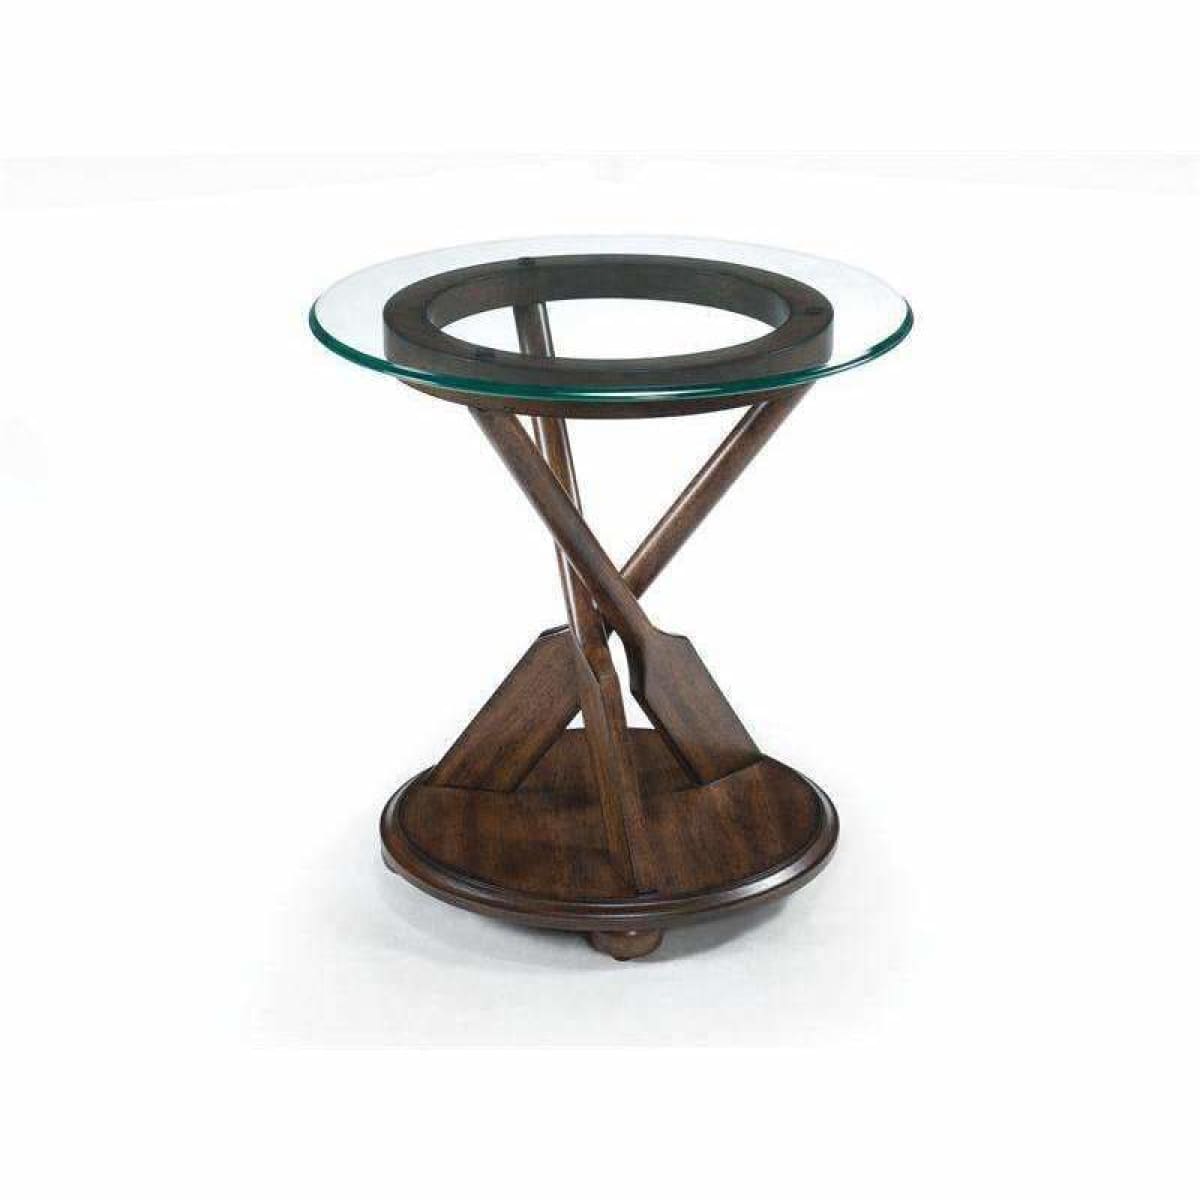 Beaufort Round End Table - END TABLE/SIDE TABLE